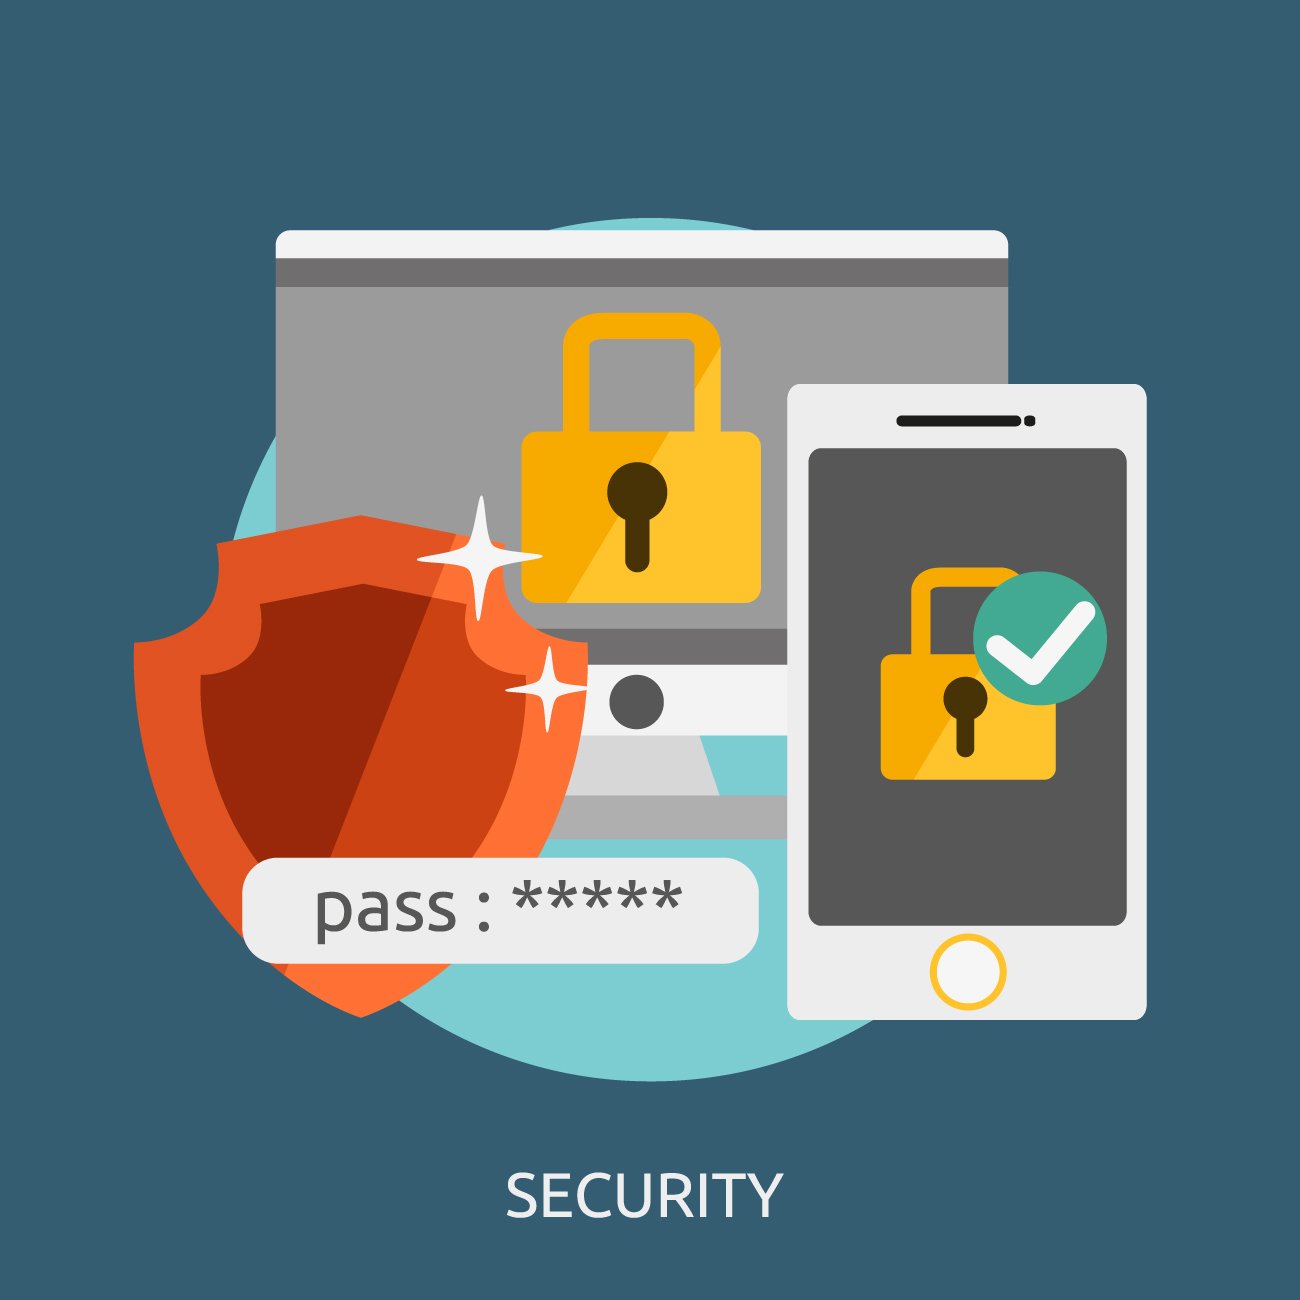 Top 5 Security Things You Should Do Right Now